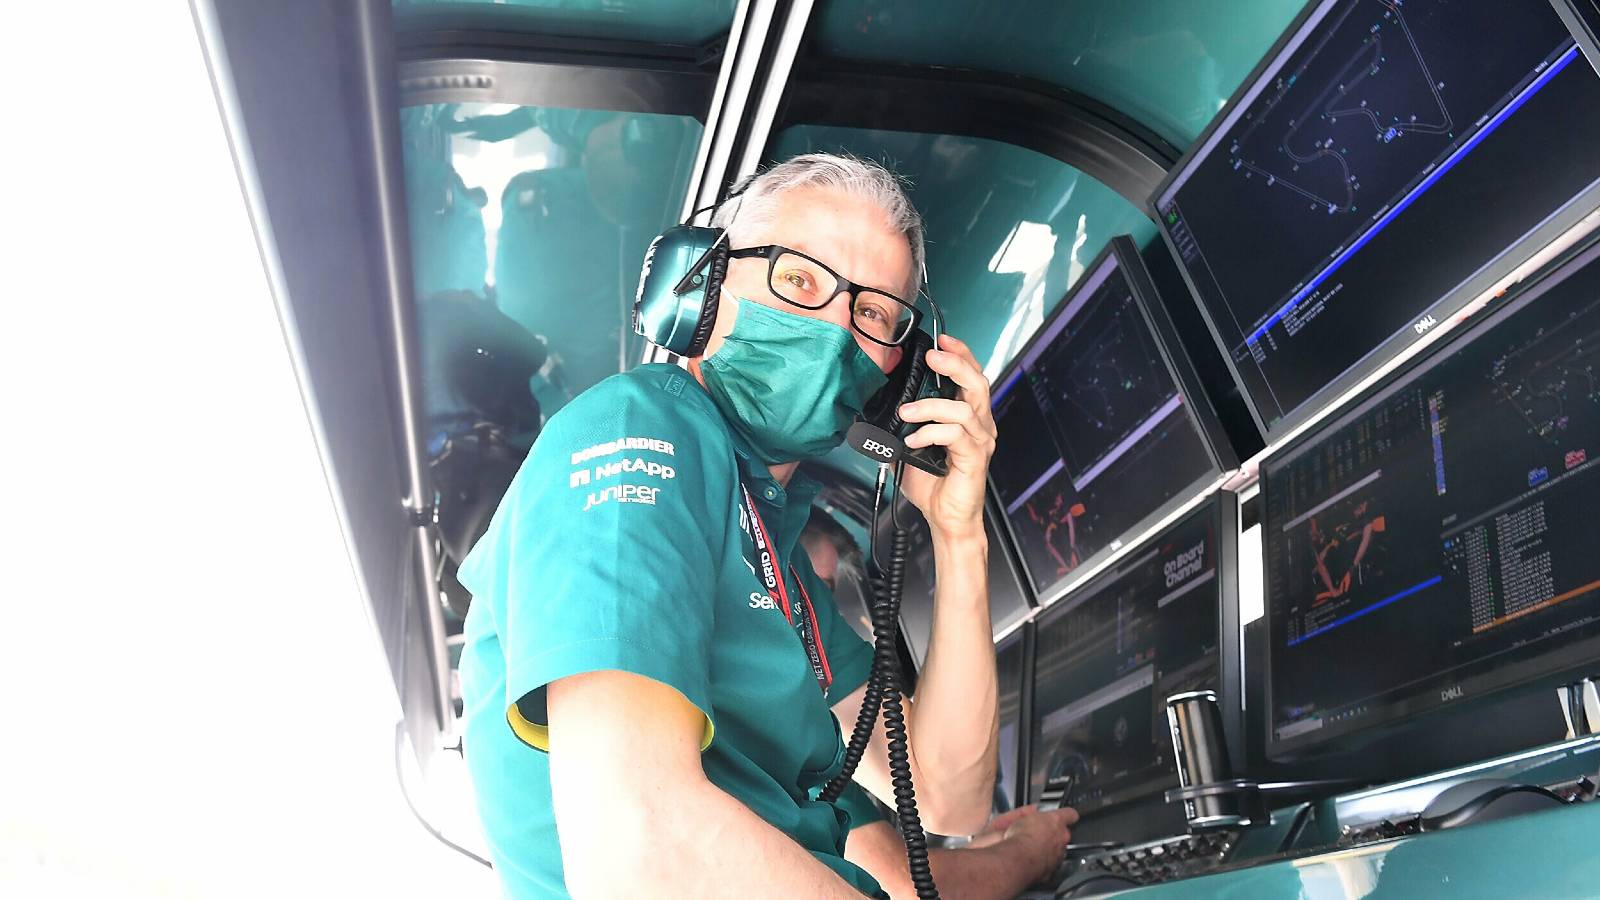 Aston Martin's Mike Krack at the pit wall. Bahrain. March 2022.